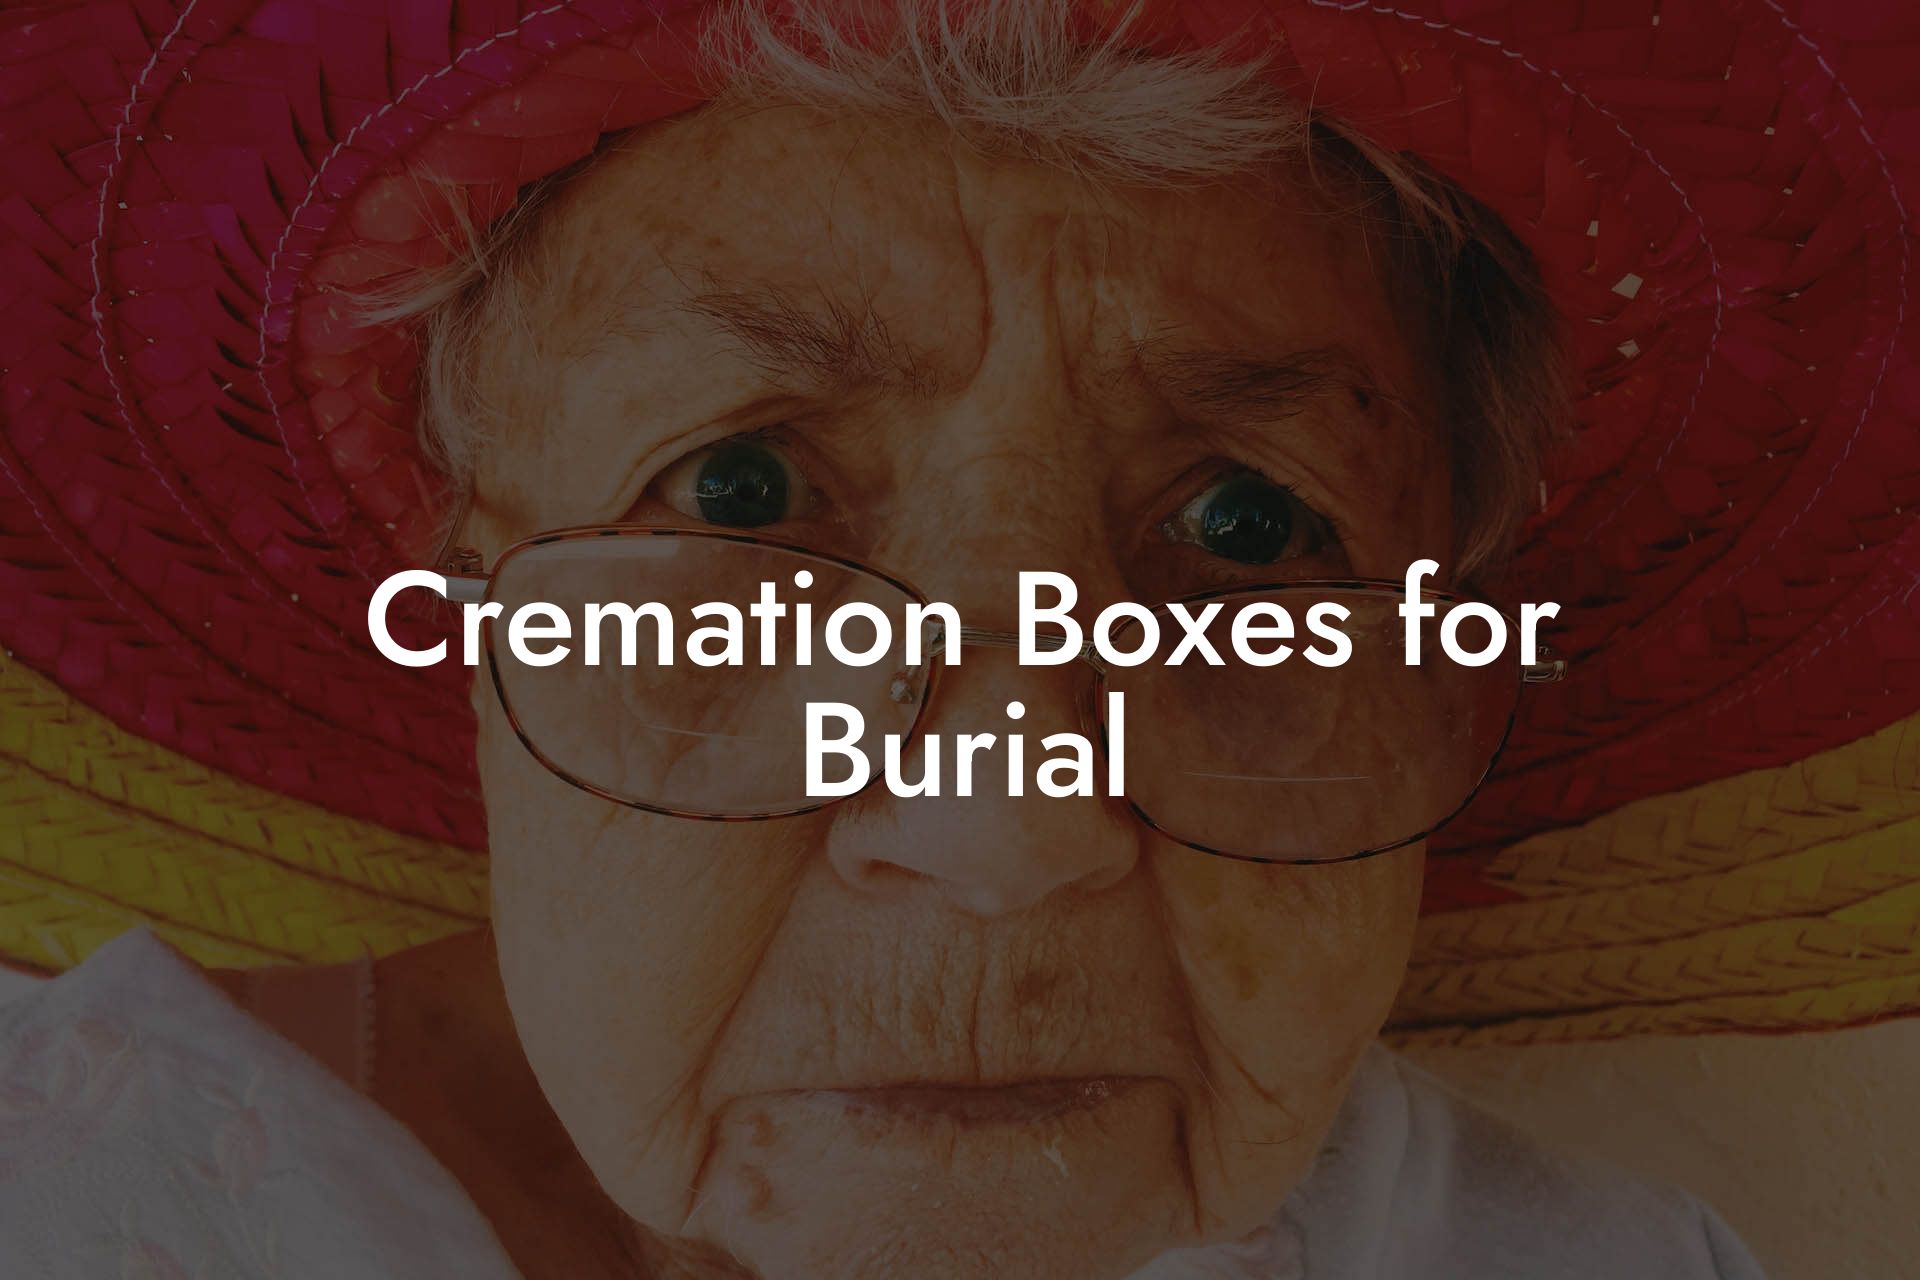 Cremation Boxes for Burial